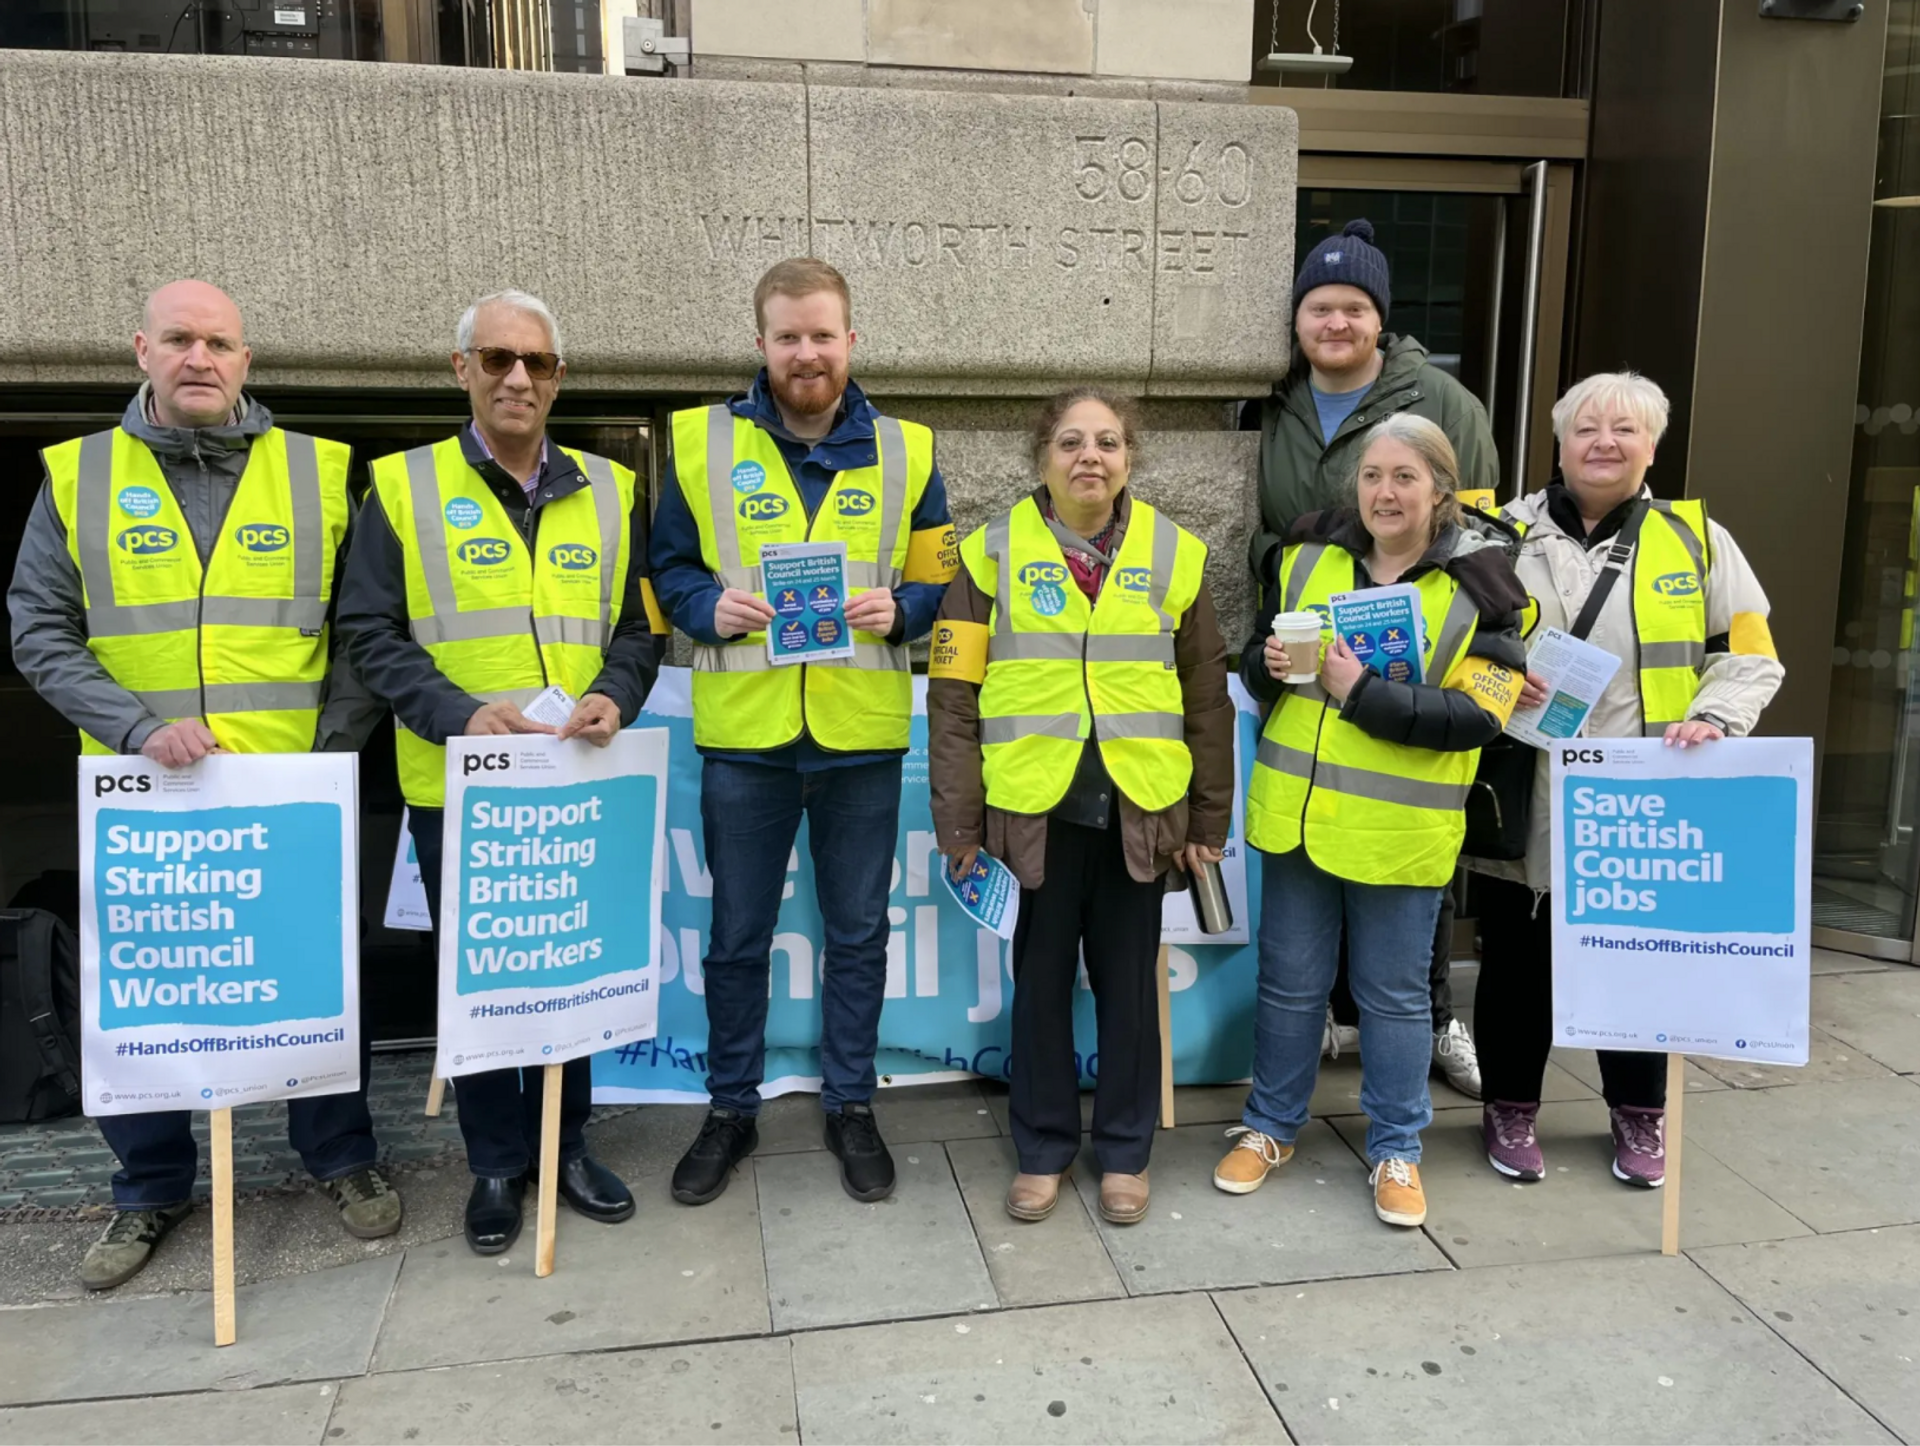 PCS members on strike at the British Council in Manchester, March 2022. Courtesy of Union News